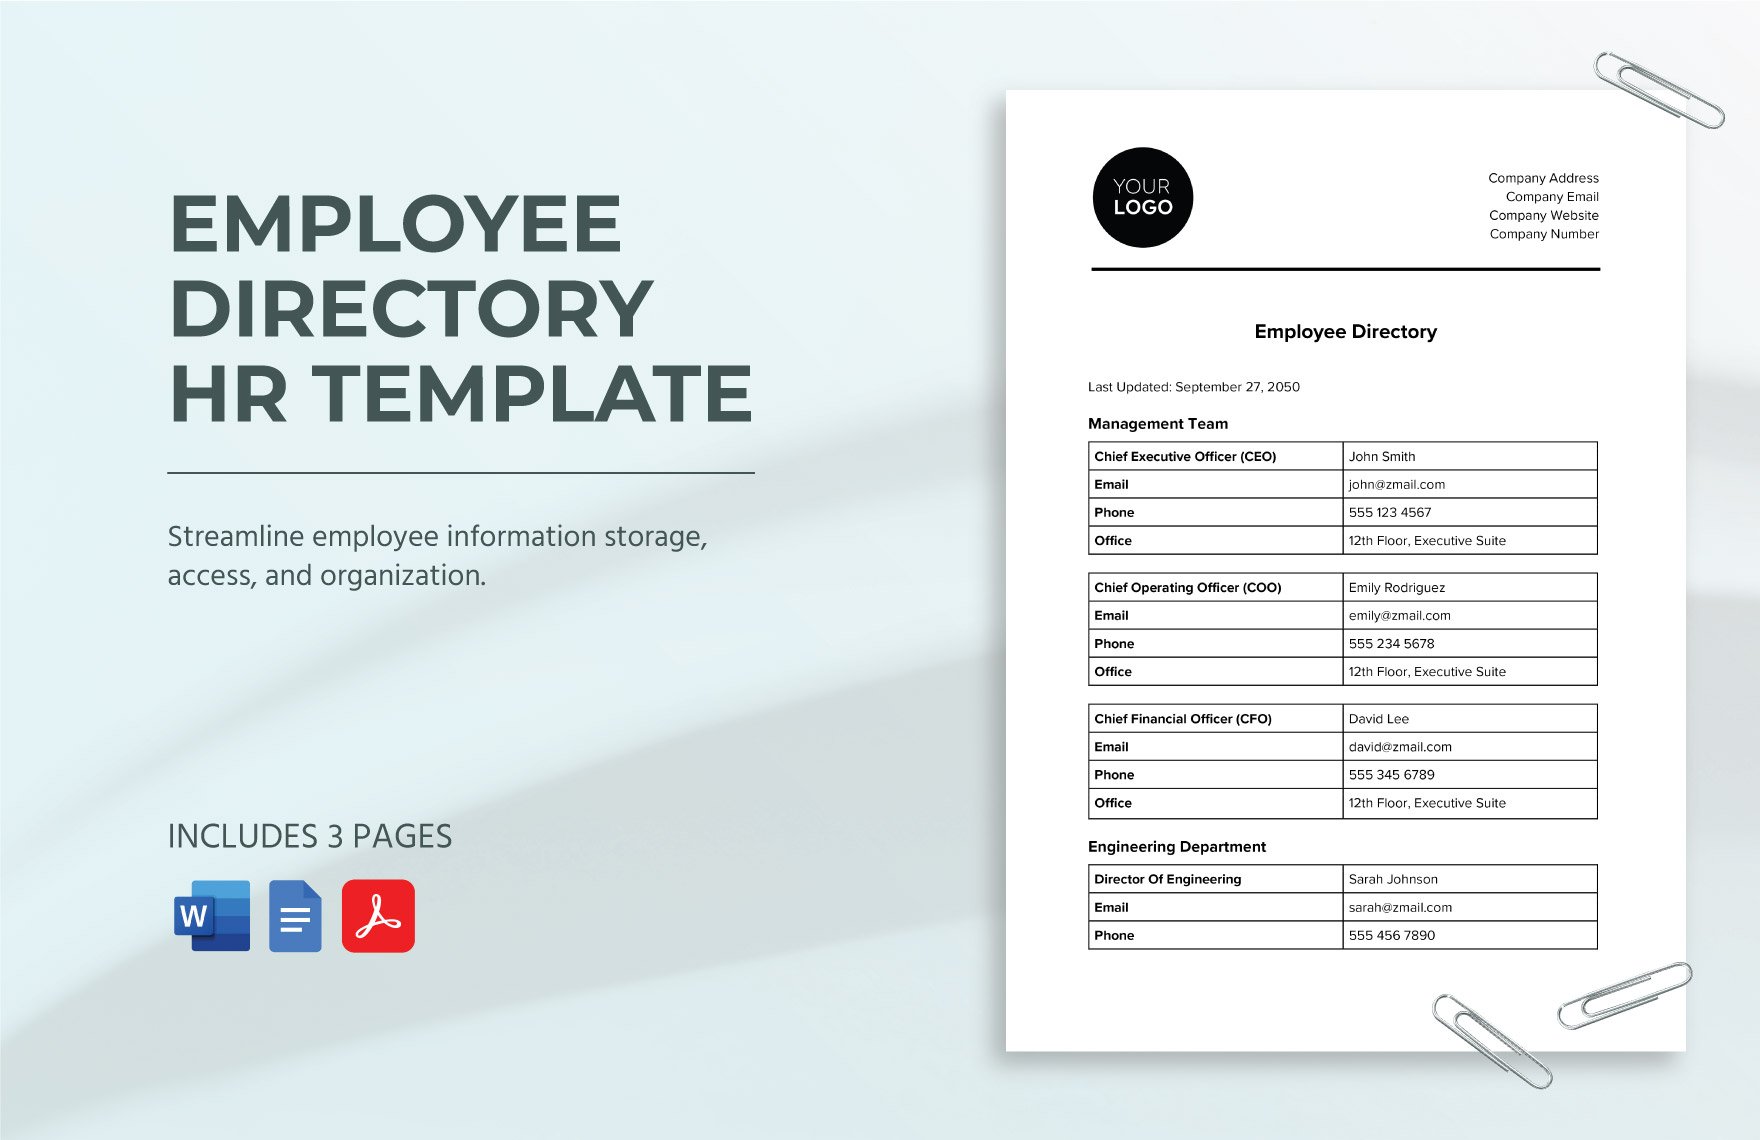 Employee Directory HR Template in Word, Google Docs, PDF